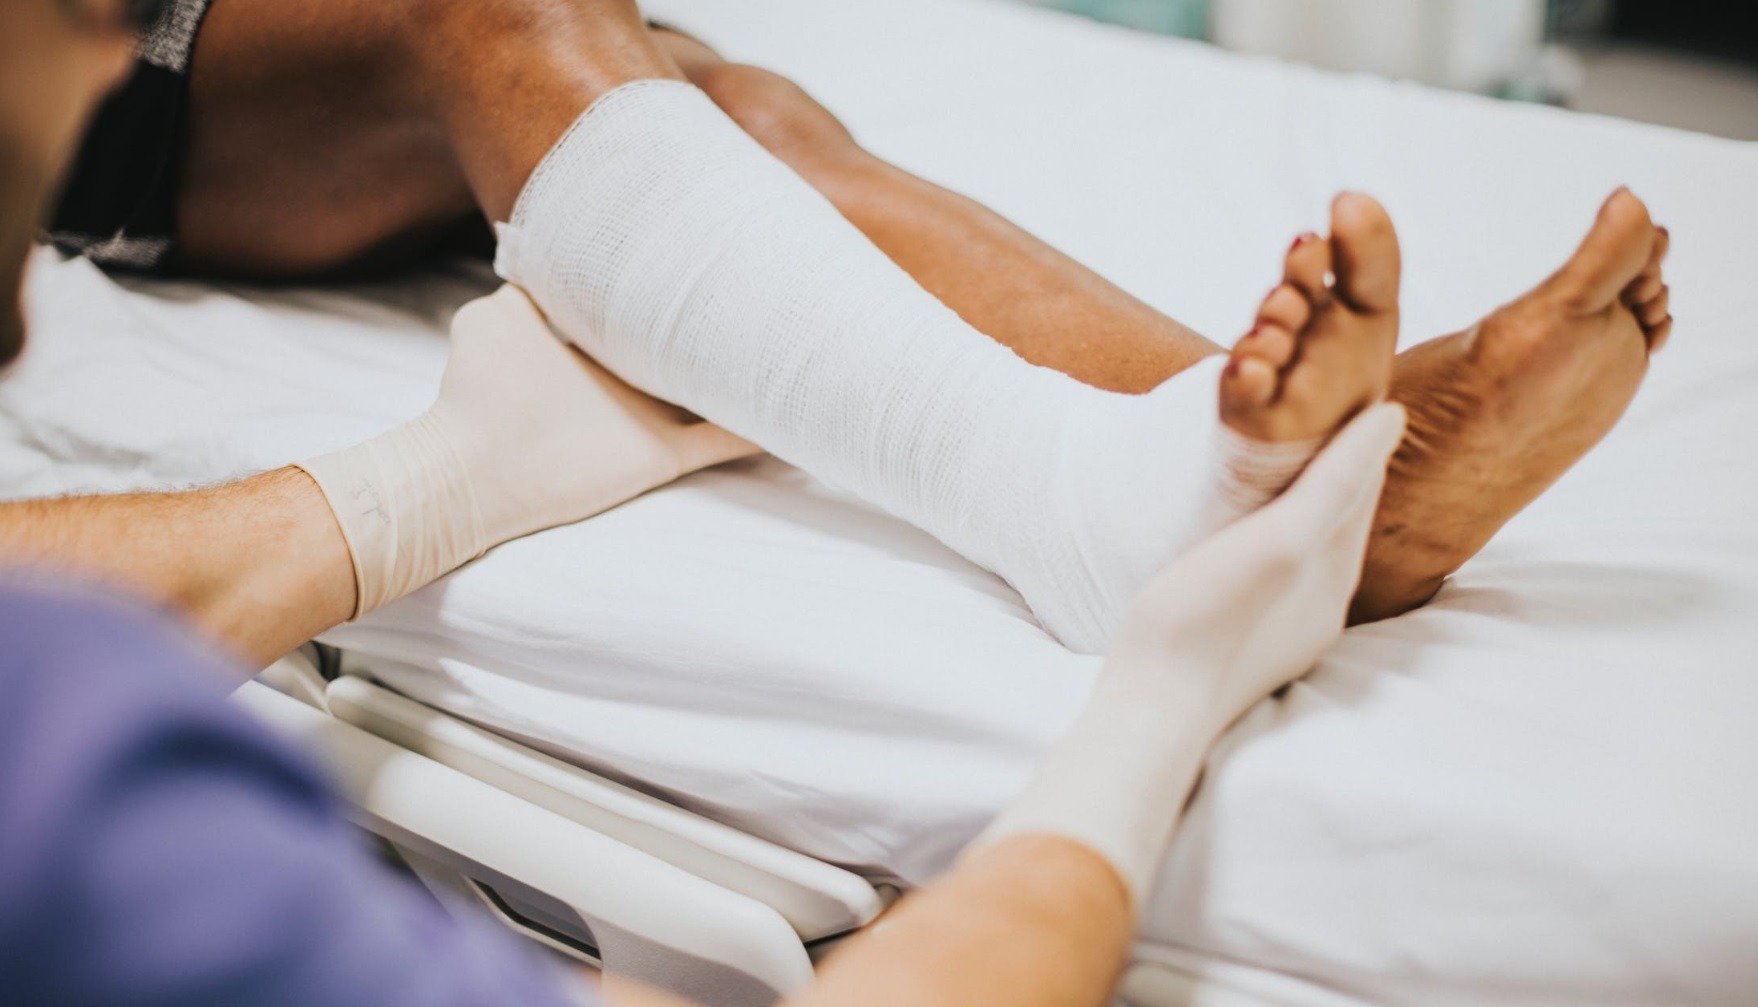 Accident Insurance: 5 factors to consider during comparison